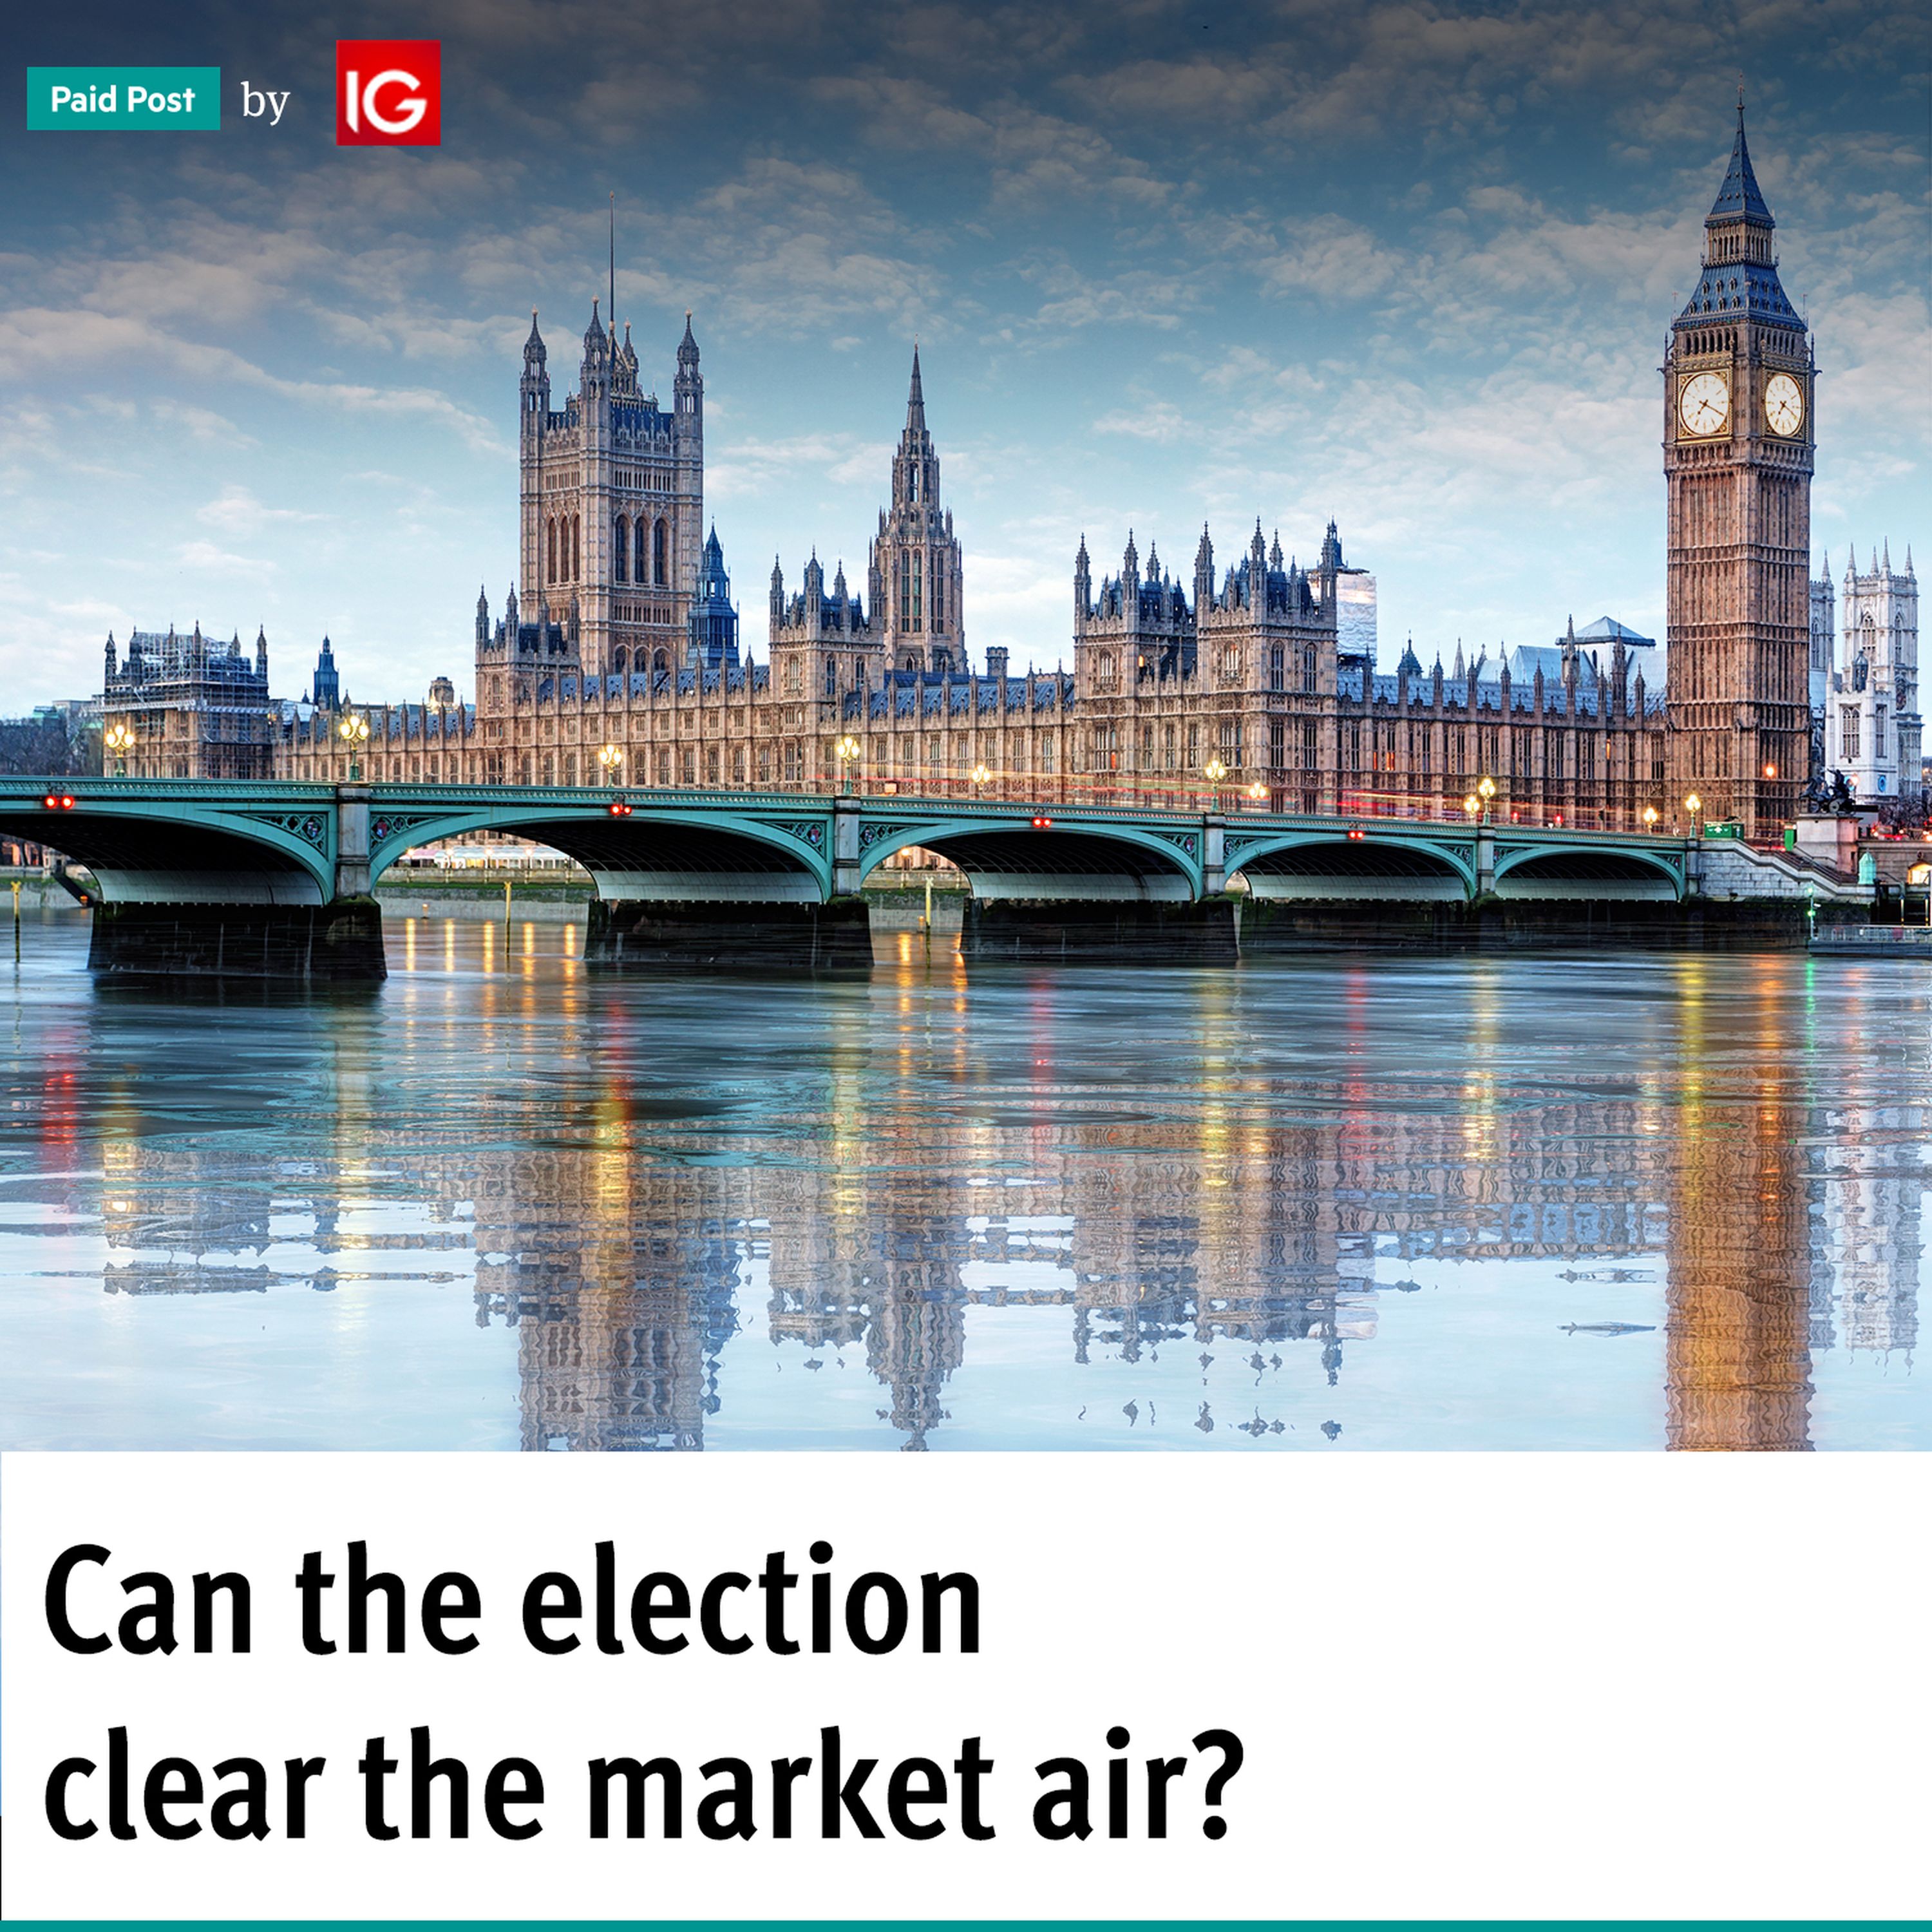 Paid Post: Can the election clear the market air?